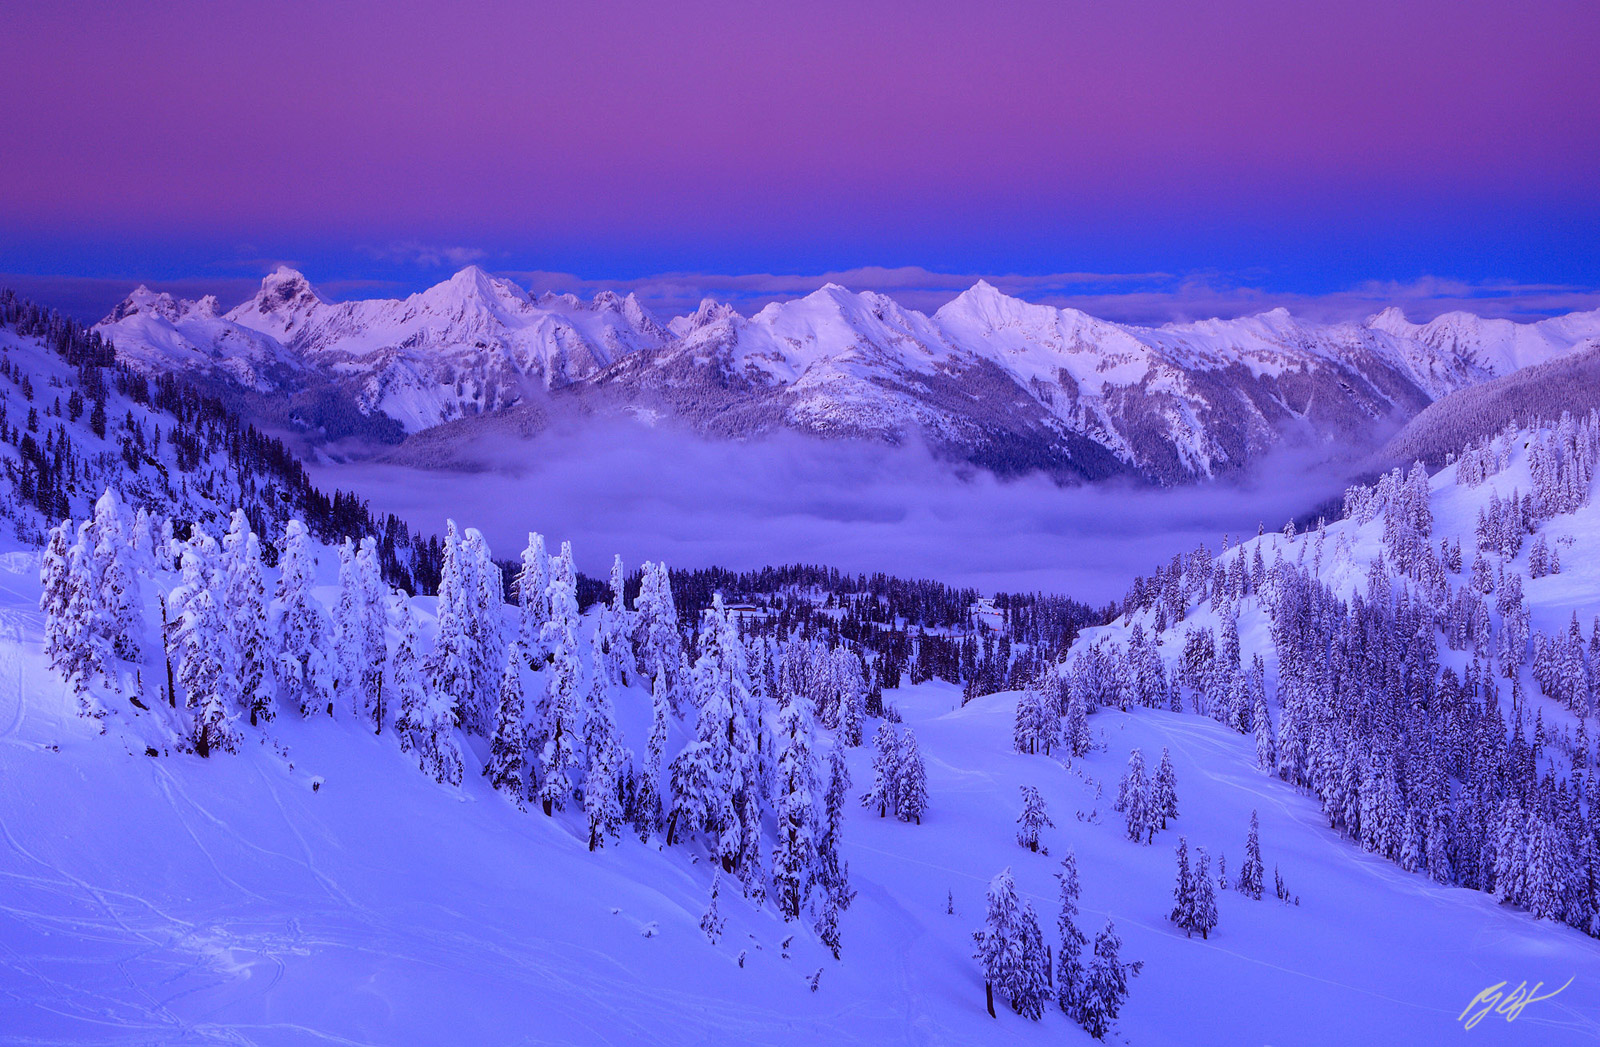 Winter Sunset over the North Cascades from Artist Point in the Mt Baker National Recreation area in Washington